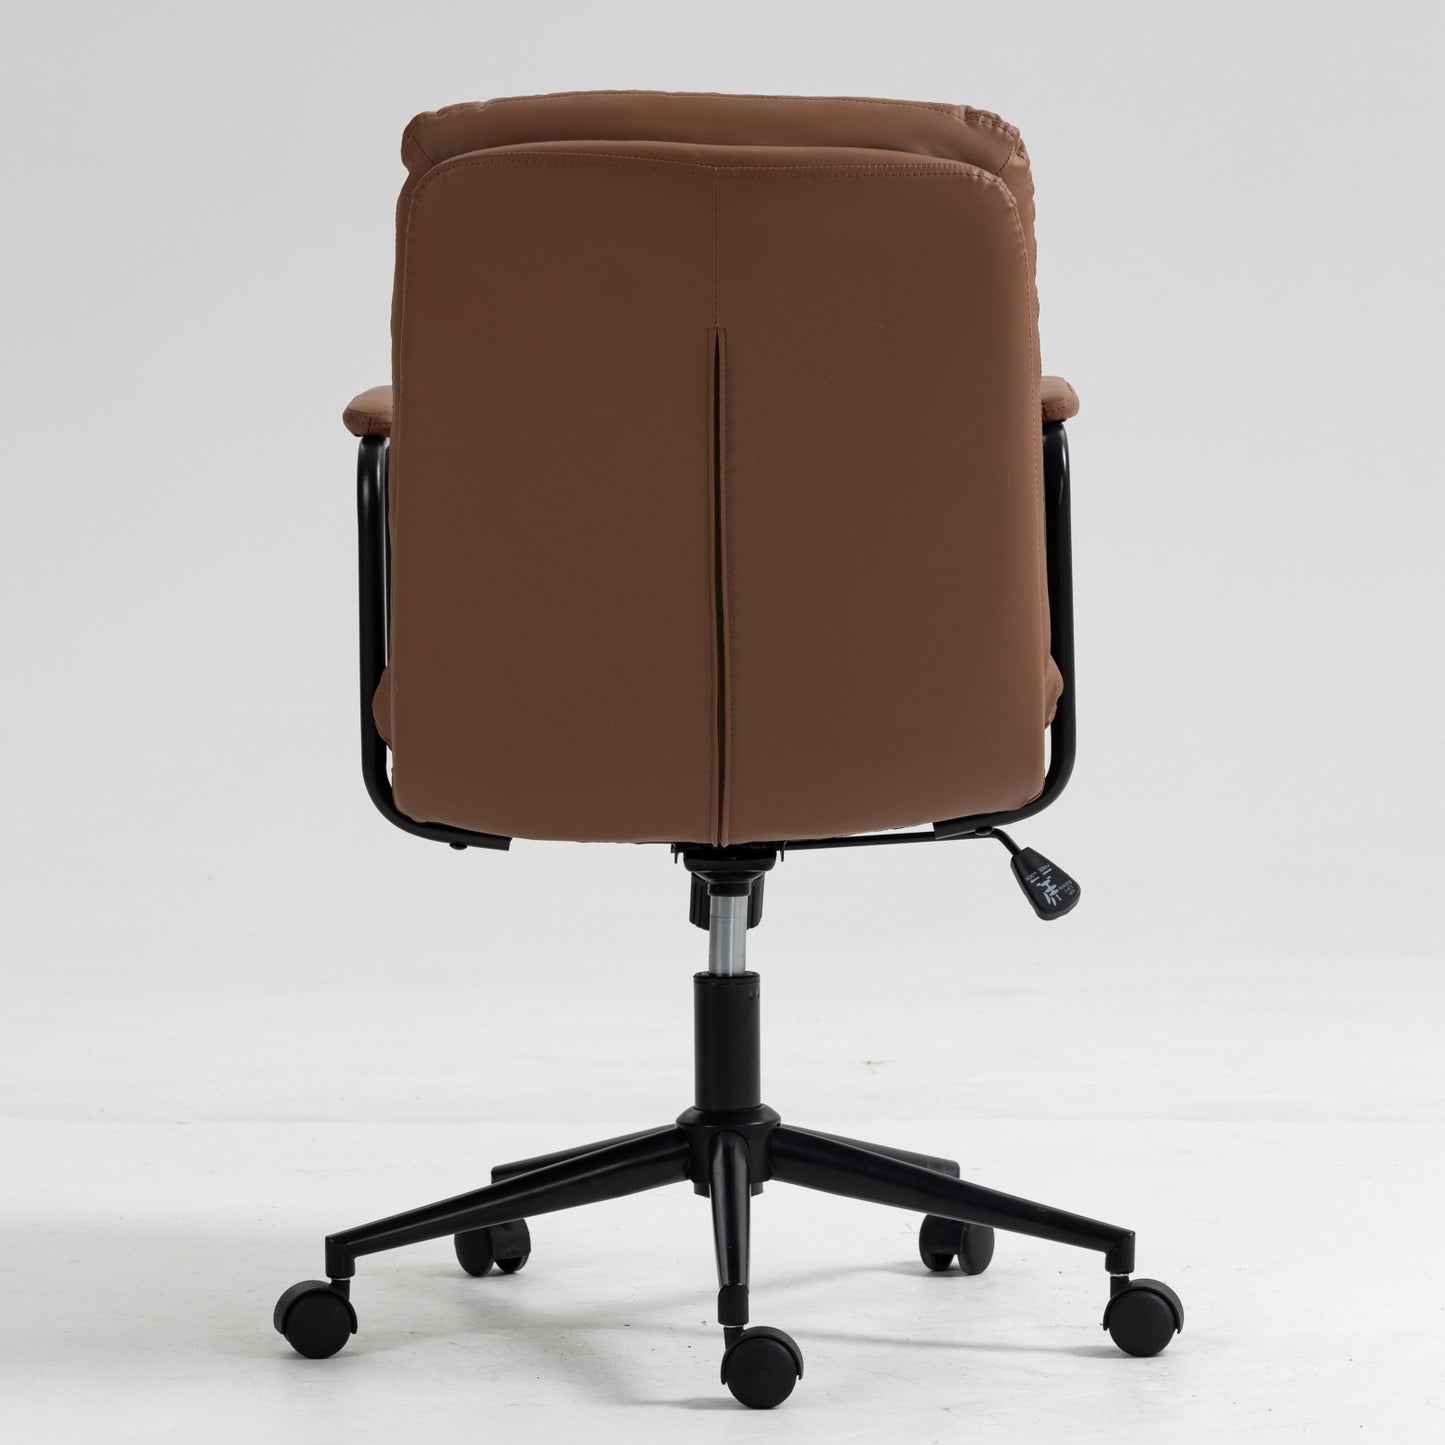 Office Chair,Mid Back Home Office Desk Task Chair with Wheels and Arms Ergonomic PU Leather Computer Rolling Swivel Chair with Padded Armrest,The back of the chair can recline 40° (Brown)